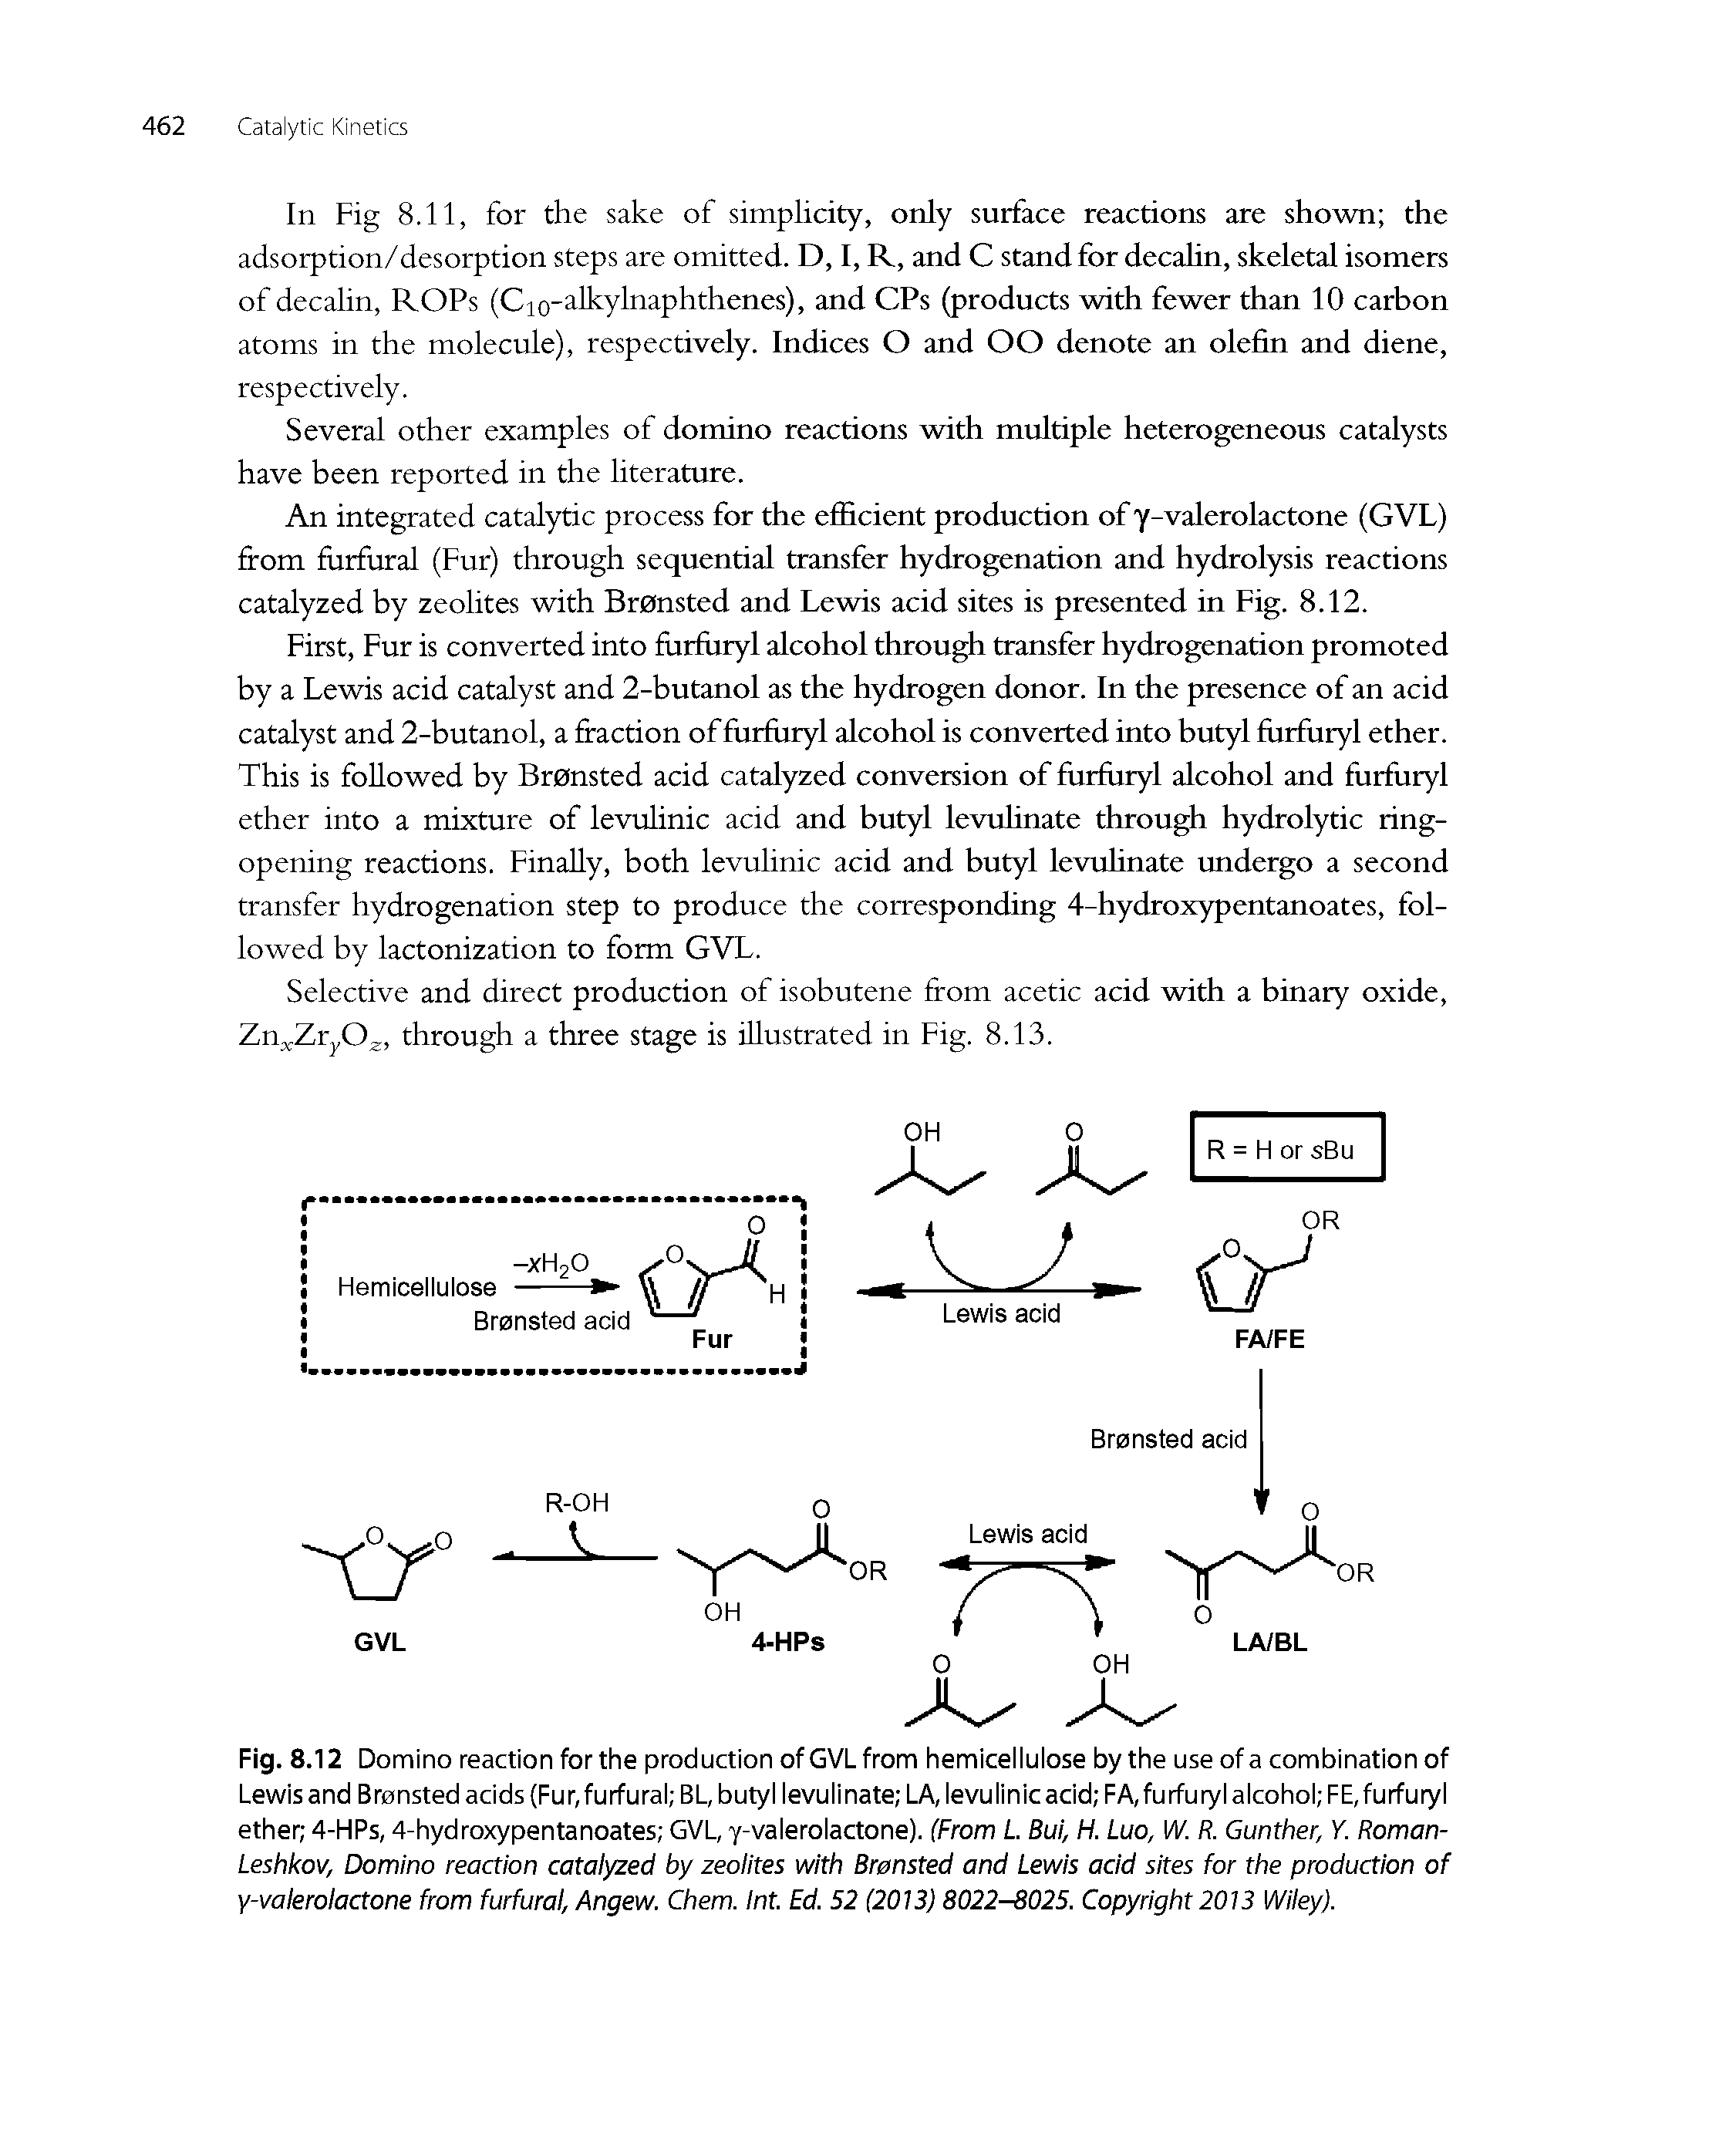 Fig. 8.12 Domino reaction for the production of GVL from hemicellulose by the use of a combination of Lewis and Bronsted acids (Fur, furfural BL, butyl levulinate LA, levulinic acid FA, furfuryl alcohol FE, furfuryl ether 4-HPs, 4-hydroxypentanoates GVL, y-valerolactone). (From L. Bui, H. Luo, N. R. Gunther, Y. Roman-Leshkov, Domino reaction cataiyzed by zeoiites with Bransted and Lewis acid sites for the production of y-vaierolactone from furfurai, Angew. Chem. int. Ed. 52 (2013) 8022-8025. Copyright 2013 Wiley).